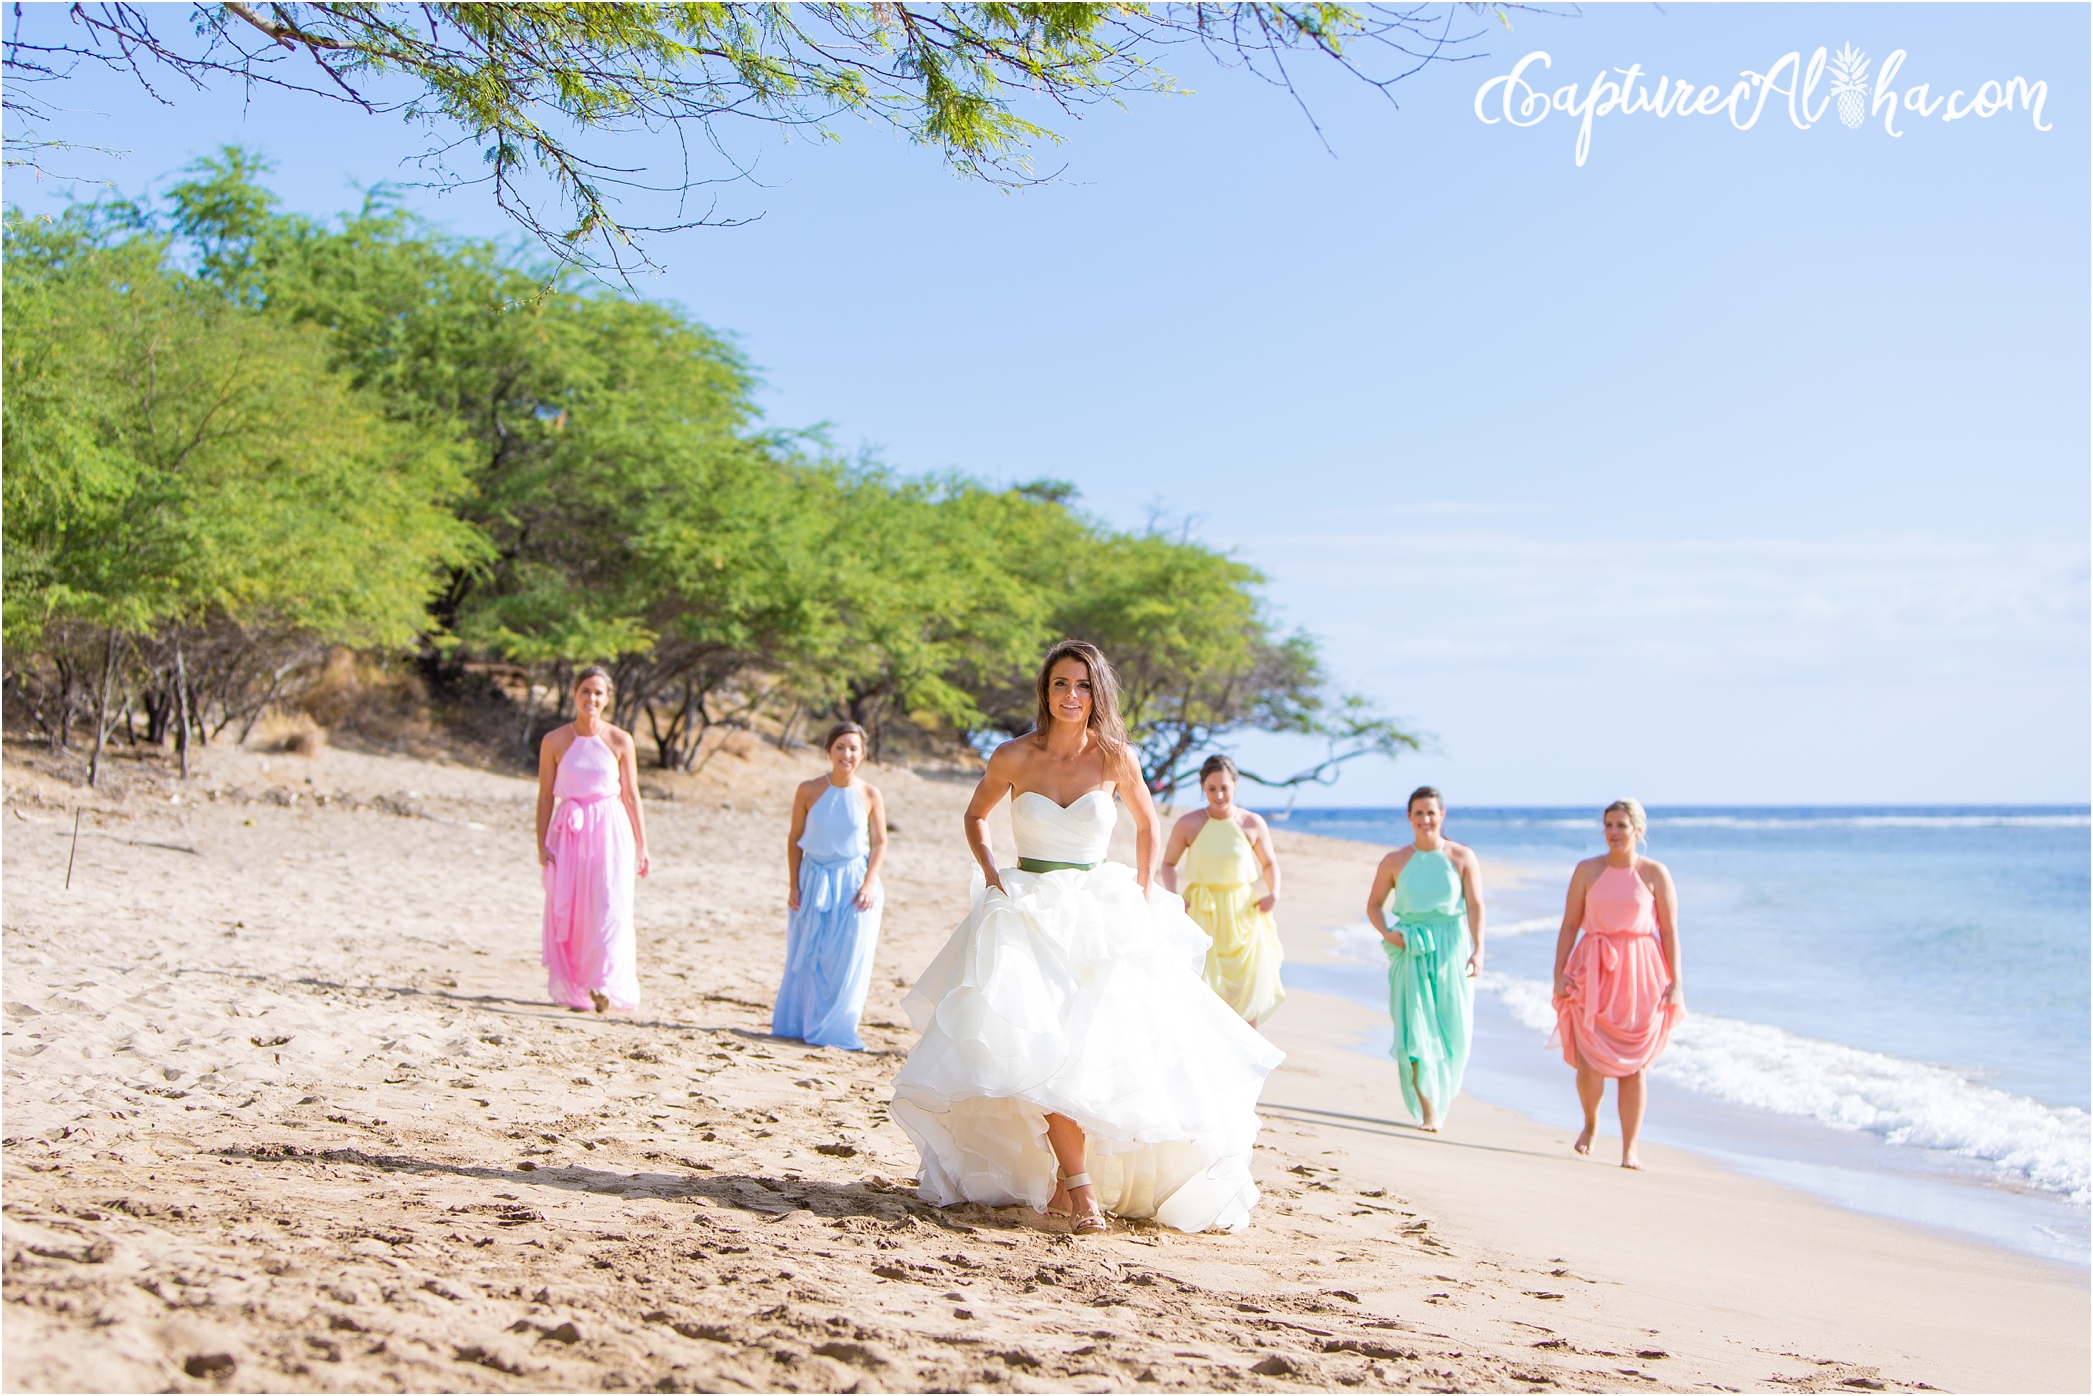 Maui Wedding Photography at the beach with the bridal party